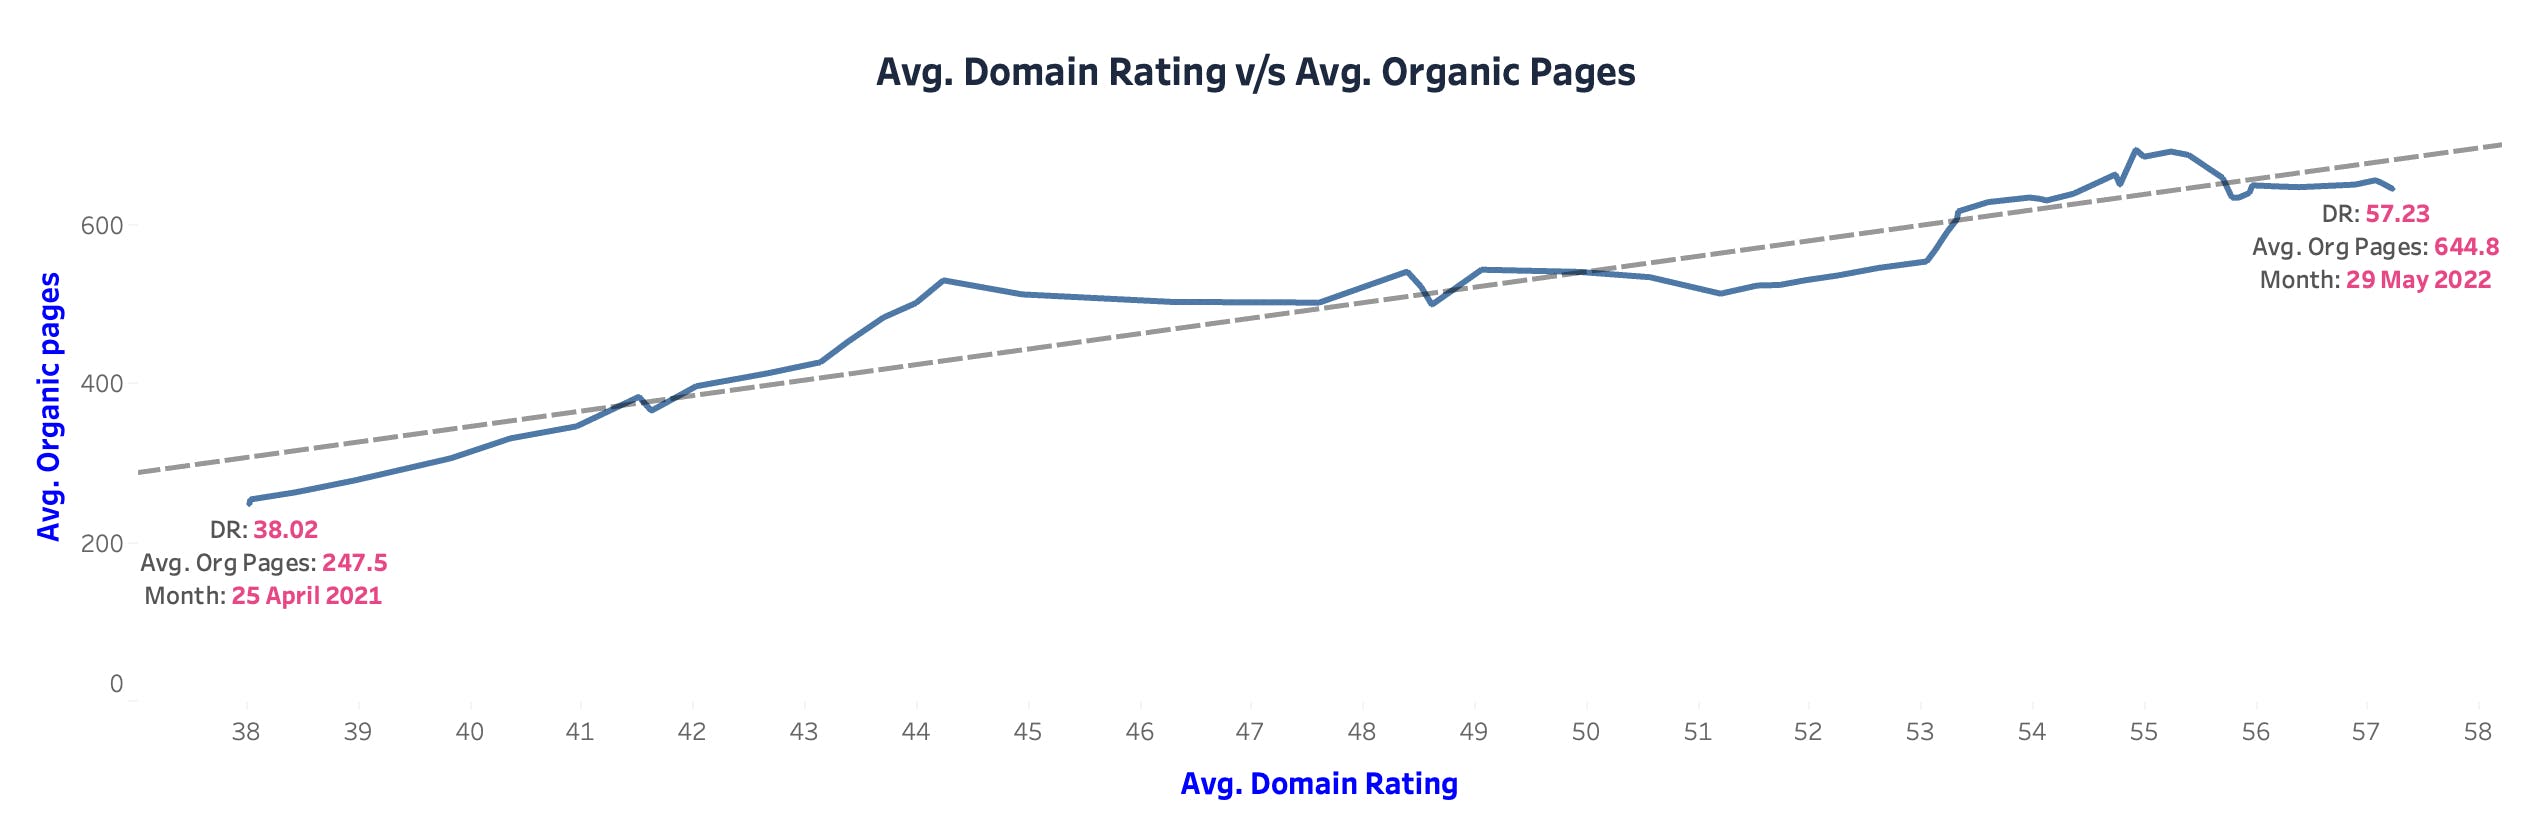 Graph ten: Average Domain Rating versus Average Organic Pages from May 2021 to May 2022